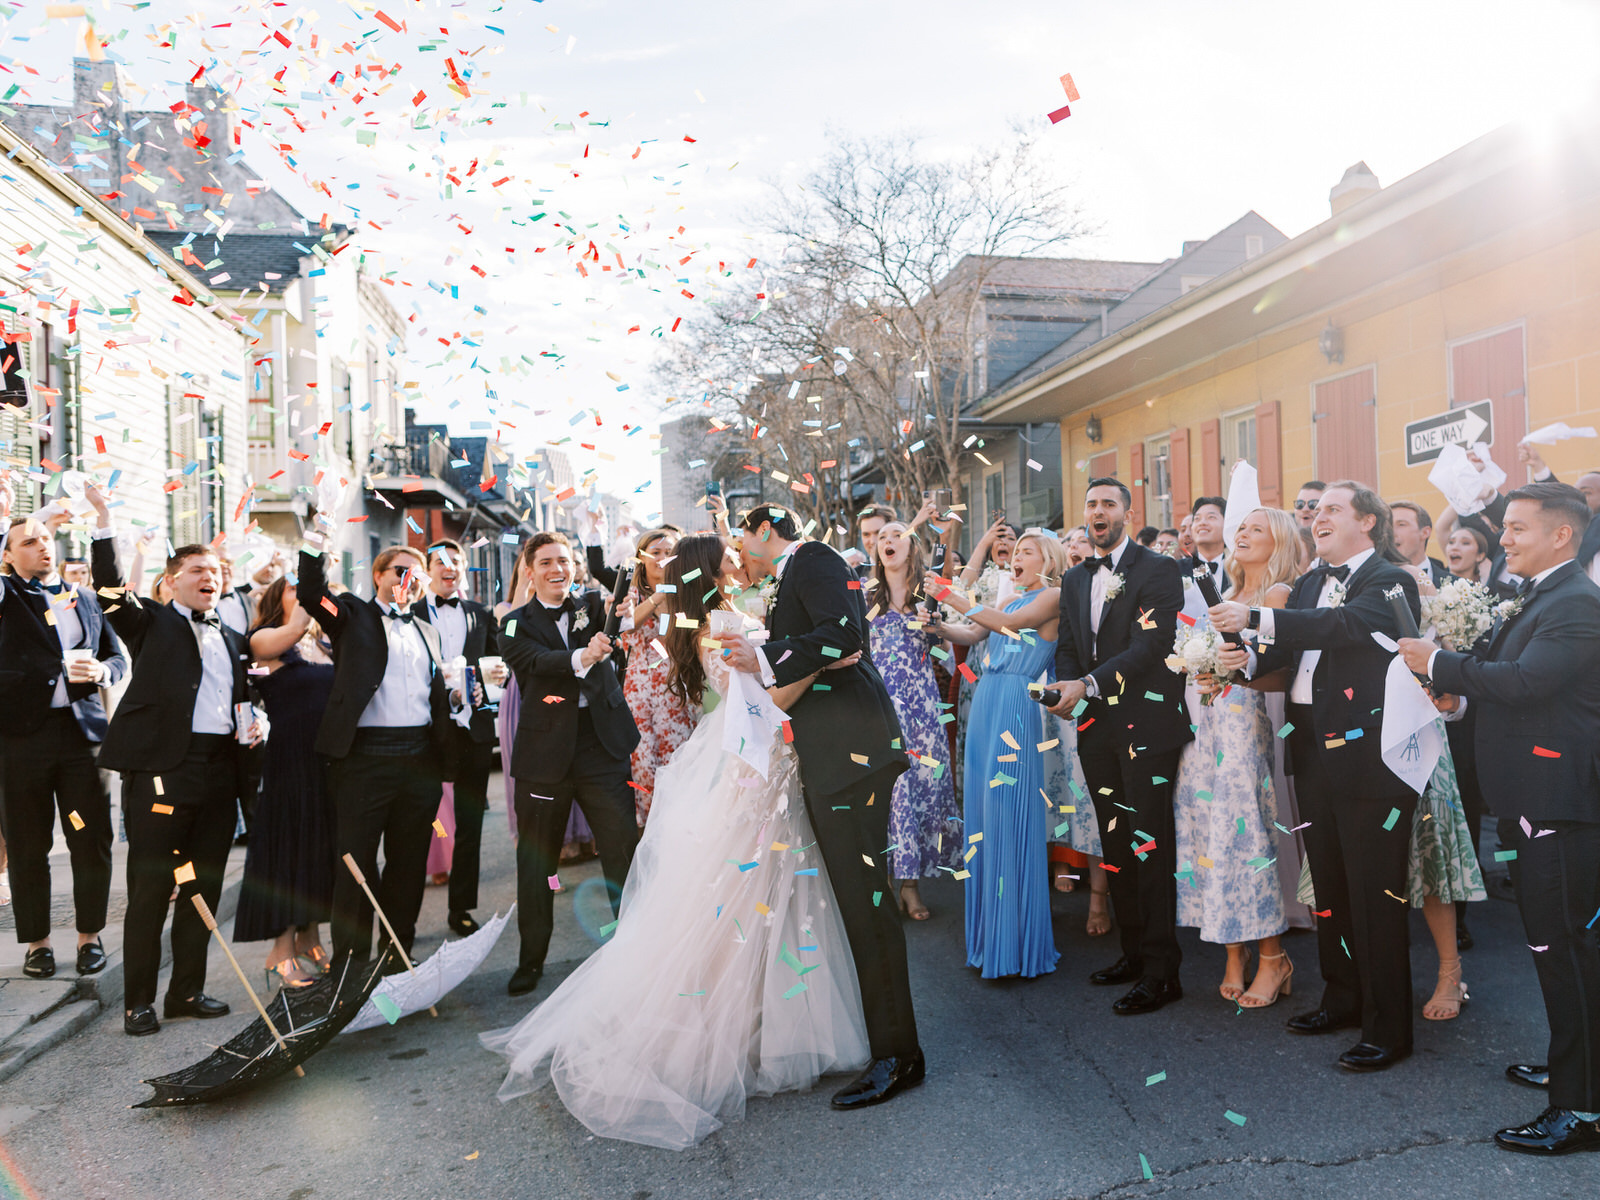 Following New Orleans Tradition, This Couple Had a Strolling Wedding Reception at the Old Ursuline Convent Museum